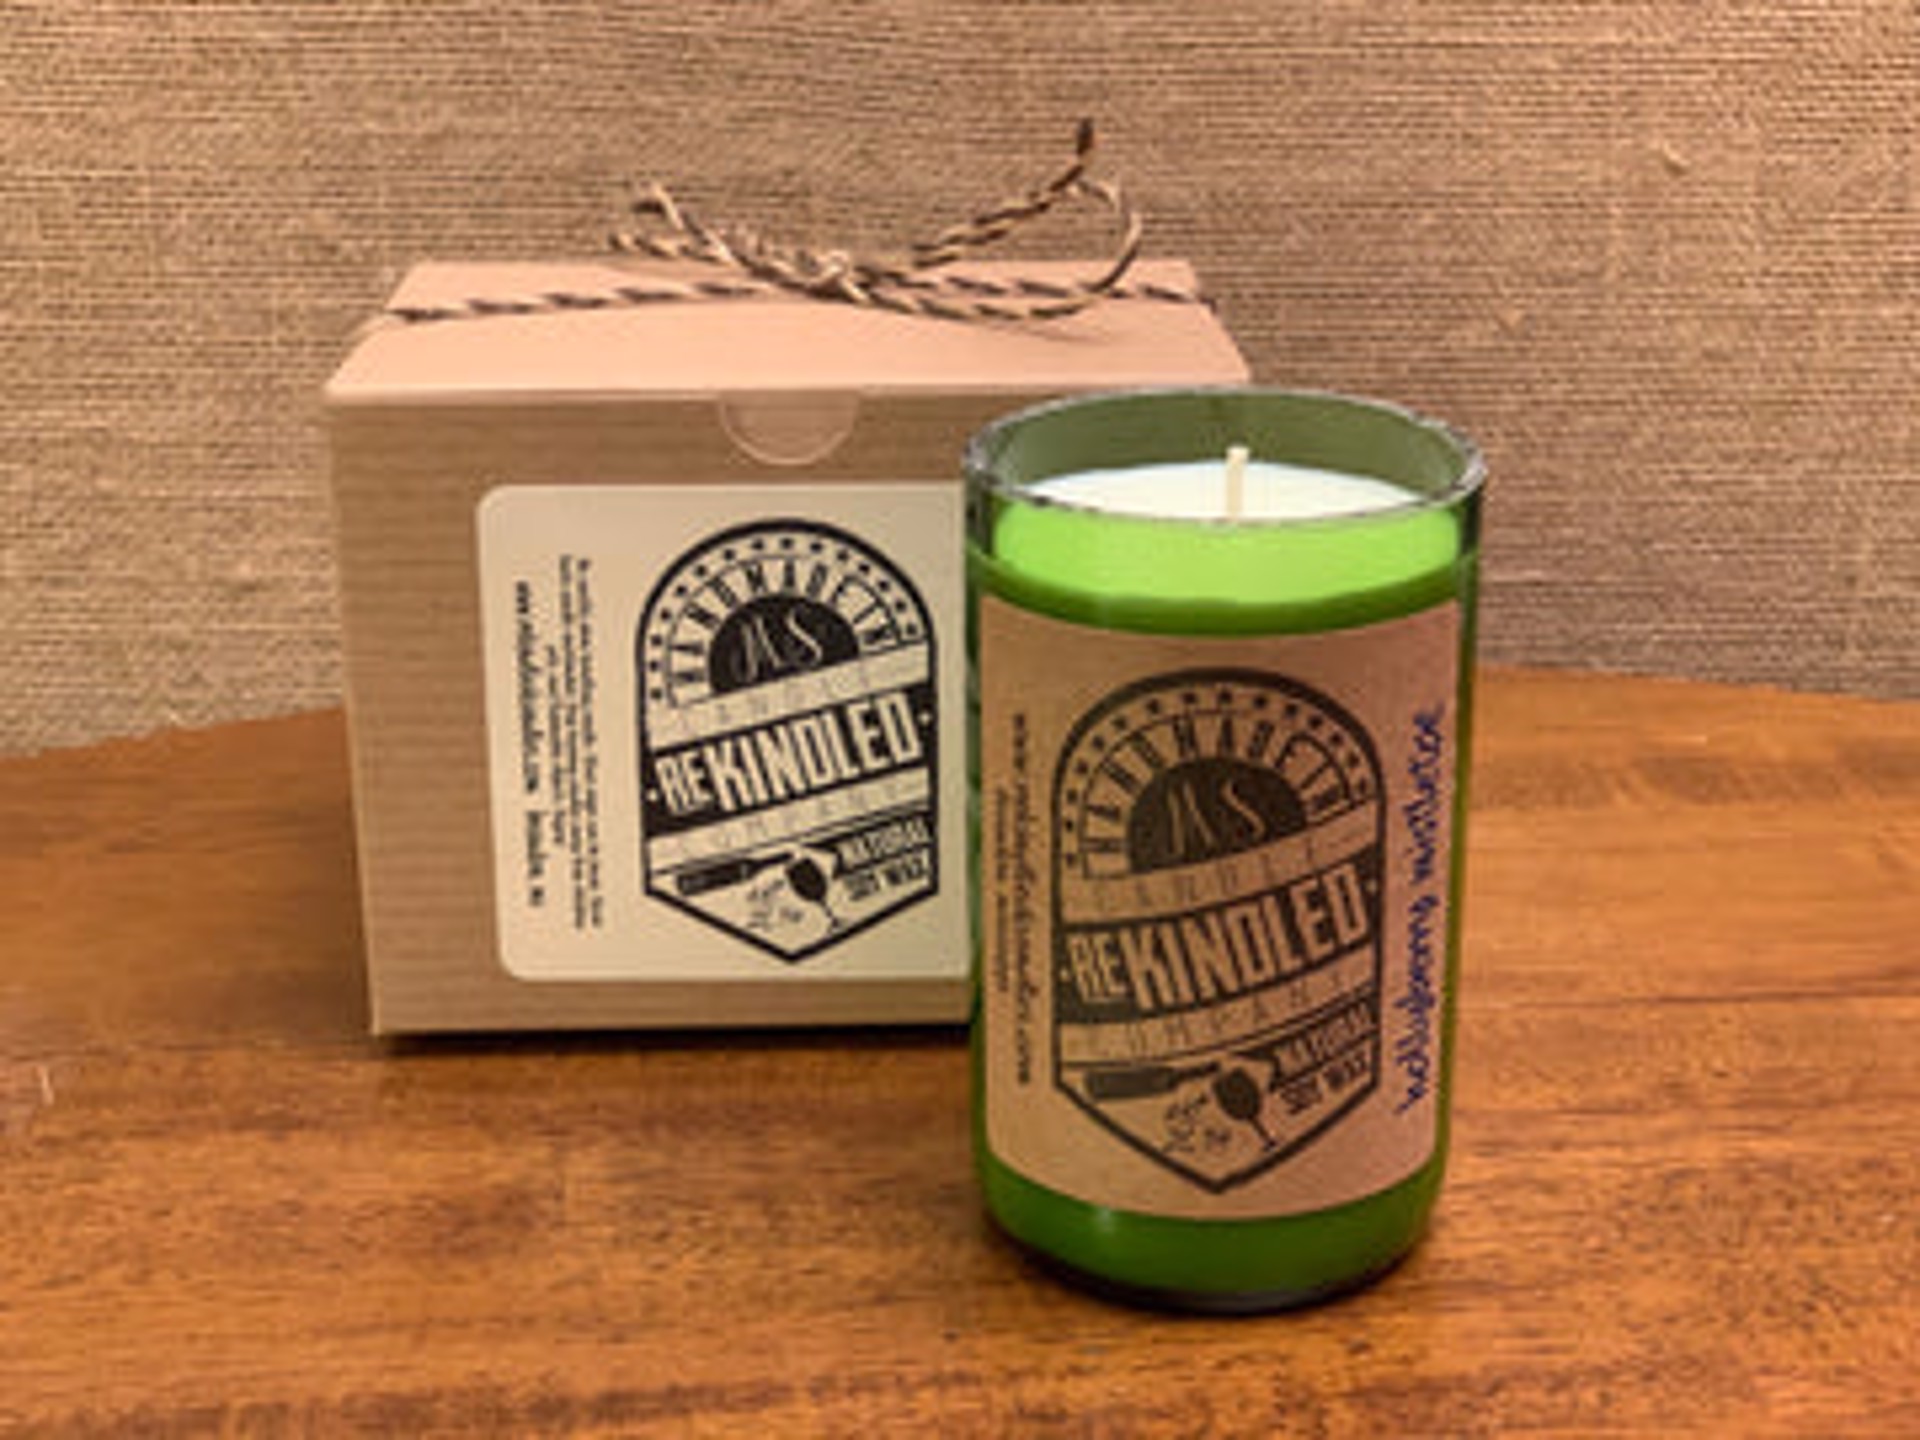 Hollyberry Mistletoe Wine Bottle Candle by re-kindled candle company